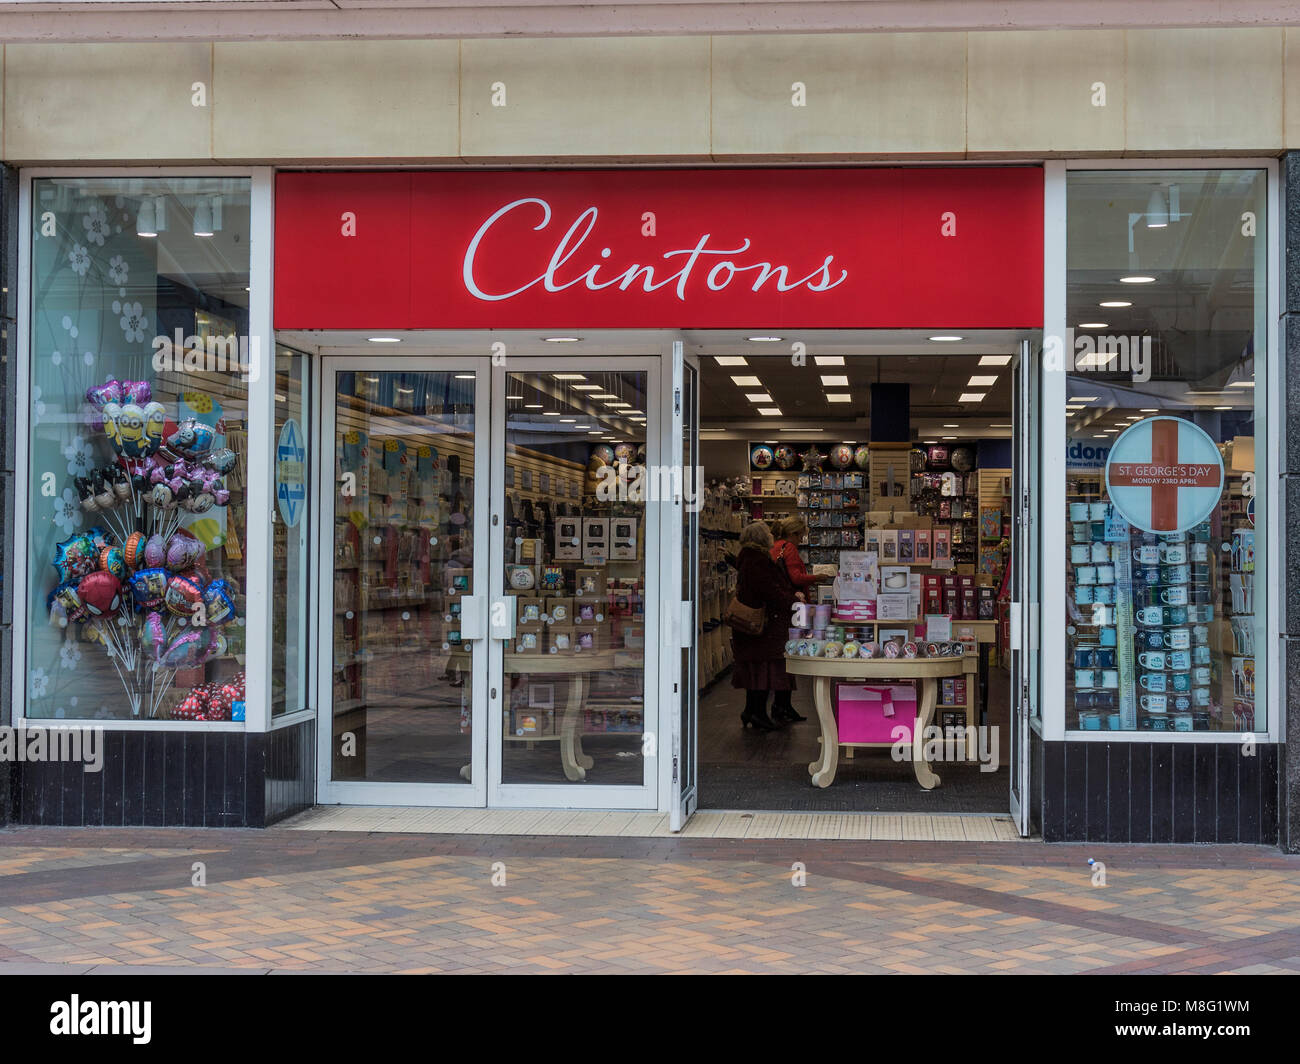 Clintons, Stockport Town Centre Shopping area, Merseyway Stock Photo